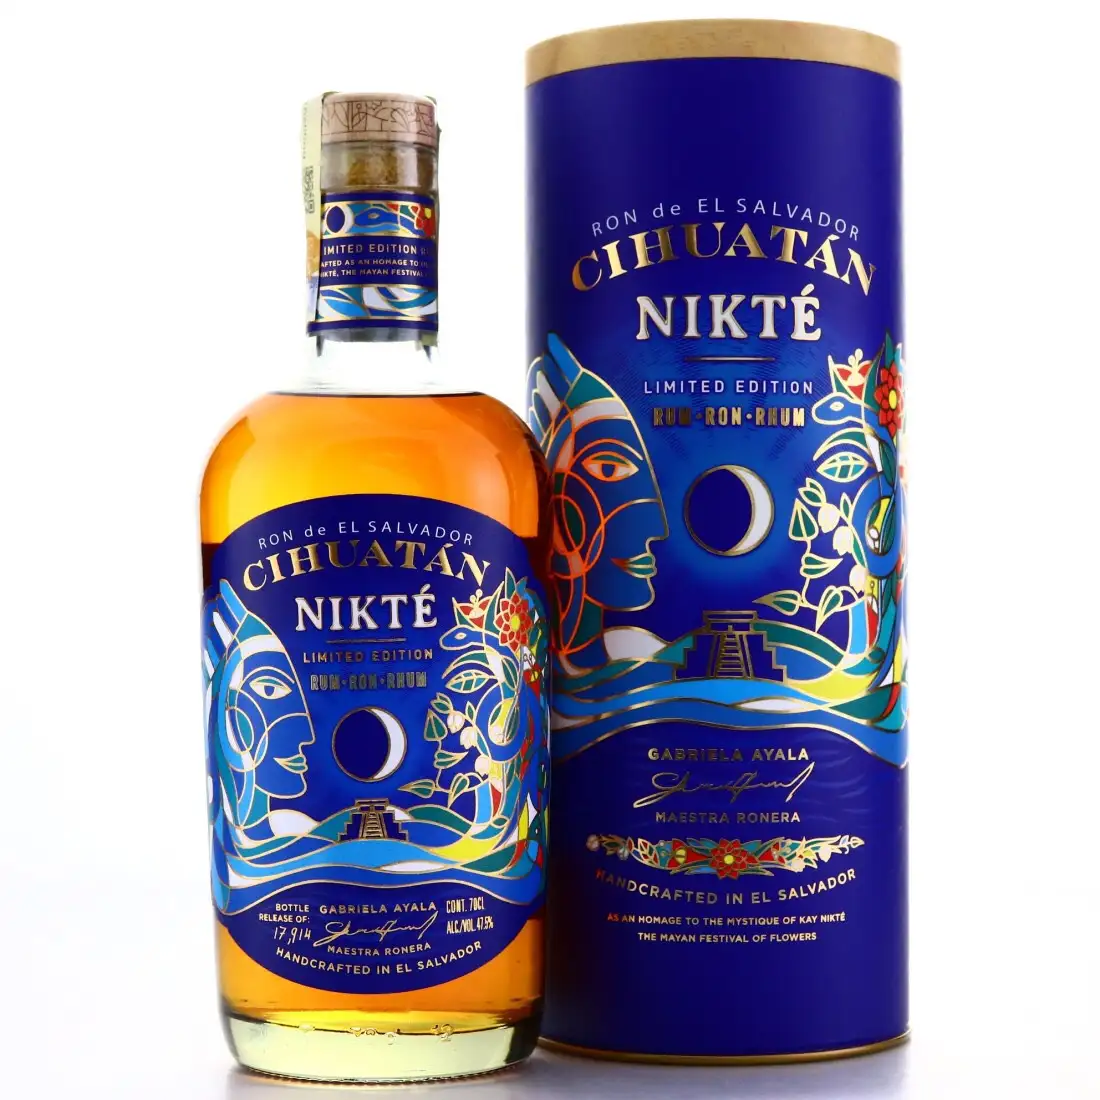 Image of the front of the bottle of the rum Nikté Limited Edition